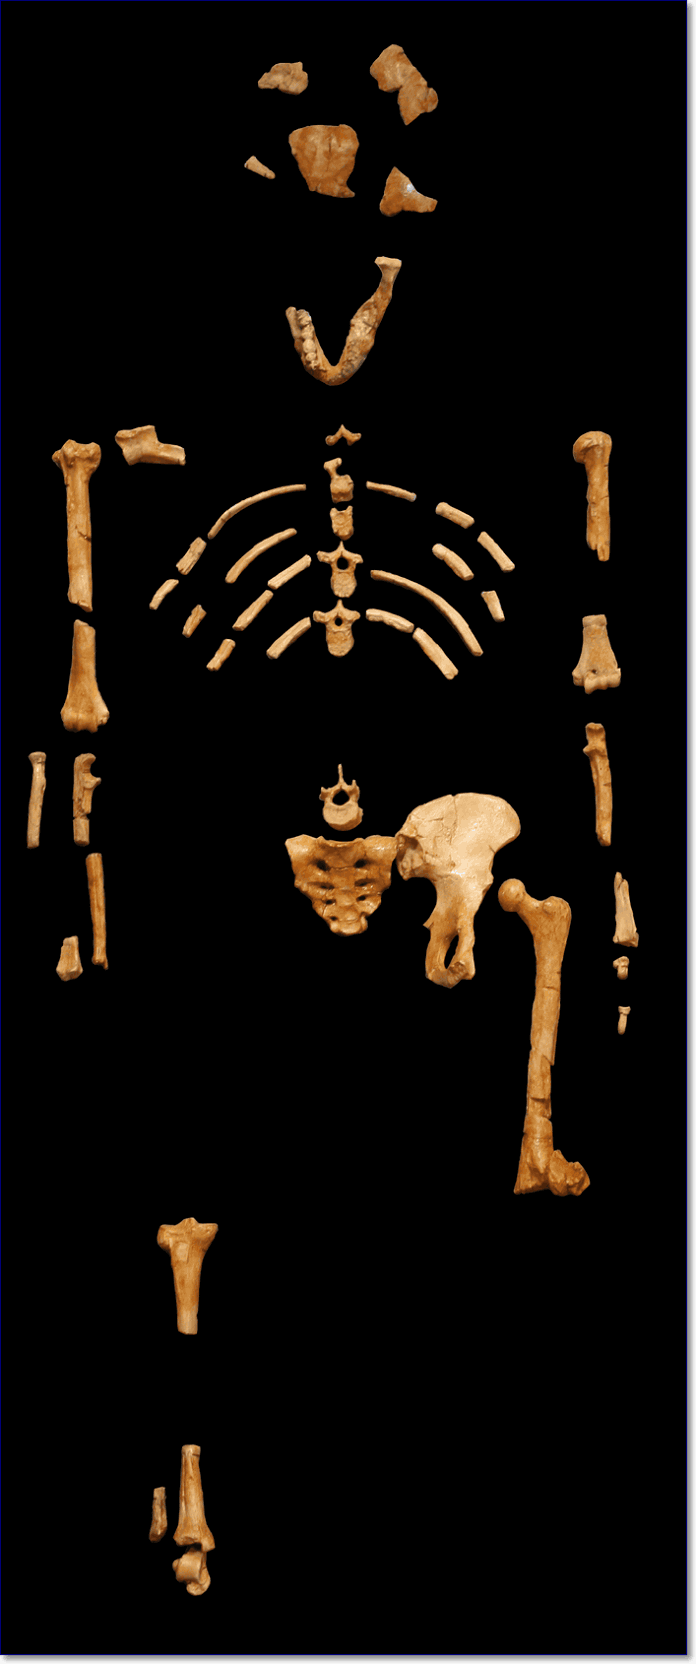 Cast of the skeleton of Lucy, an A. afarensis